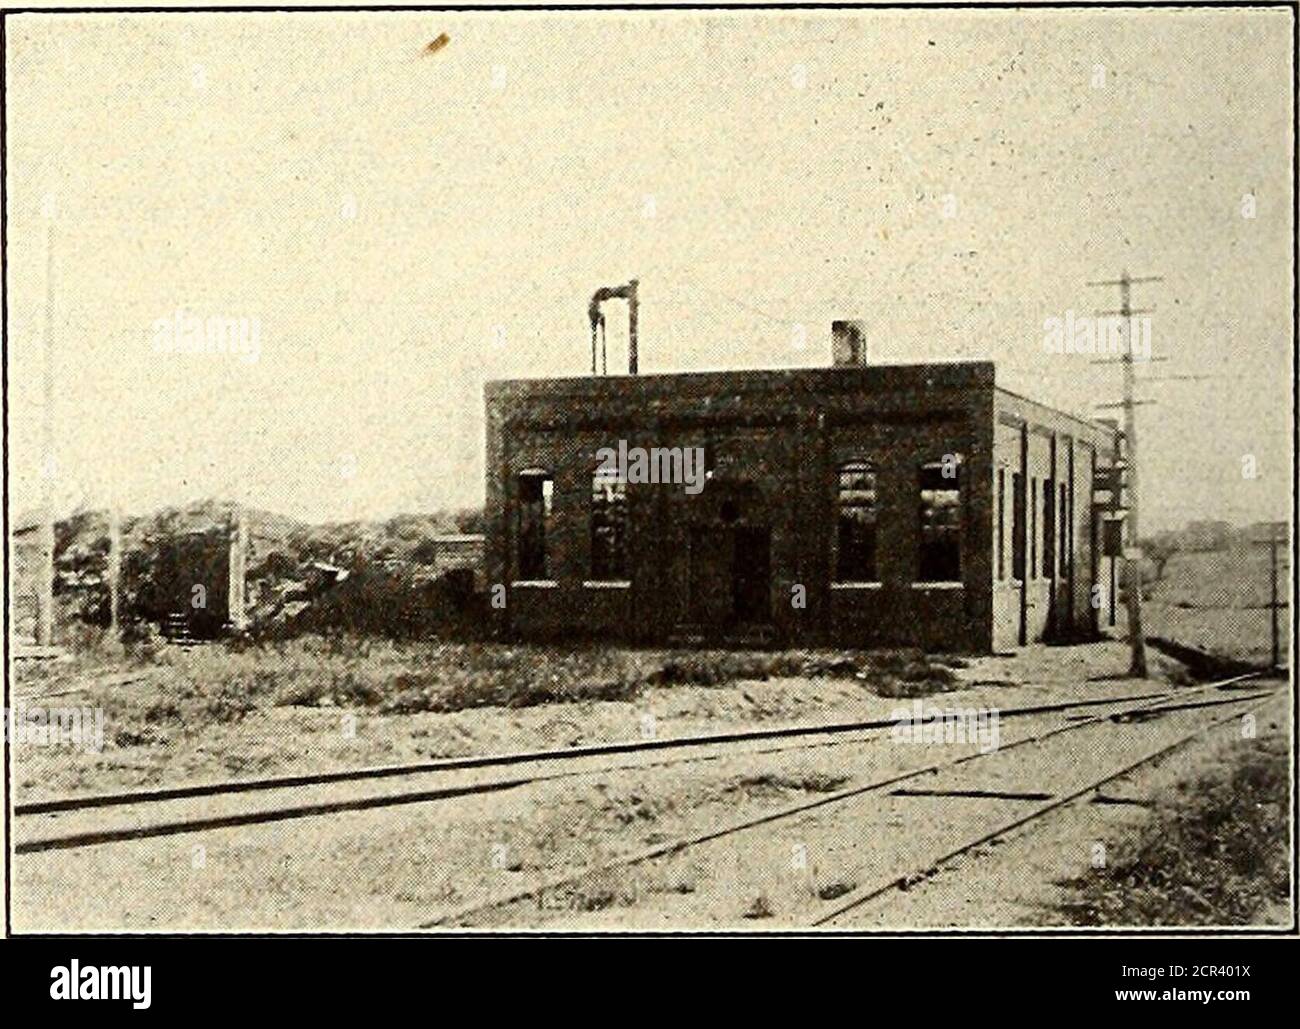 The Street railway journal . pal steam plant is at Kittery Point,  whichserved for years as the power supply for the Portsmouth,Kittery & York  Railway, now constituting the Western divi-sion. This